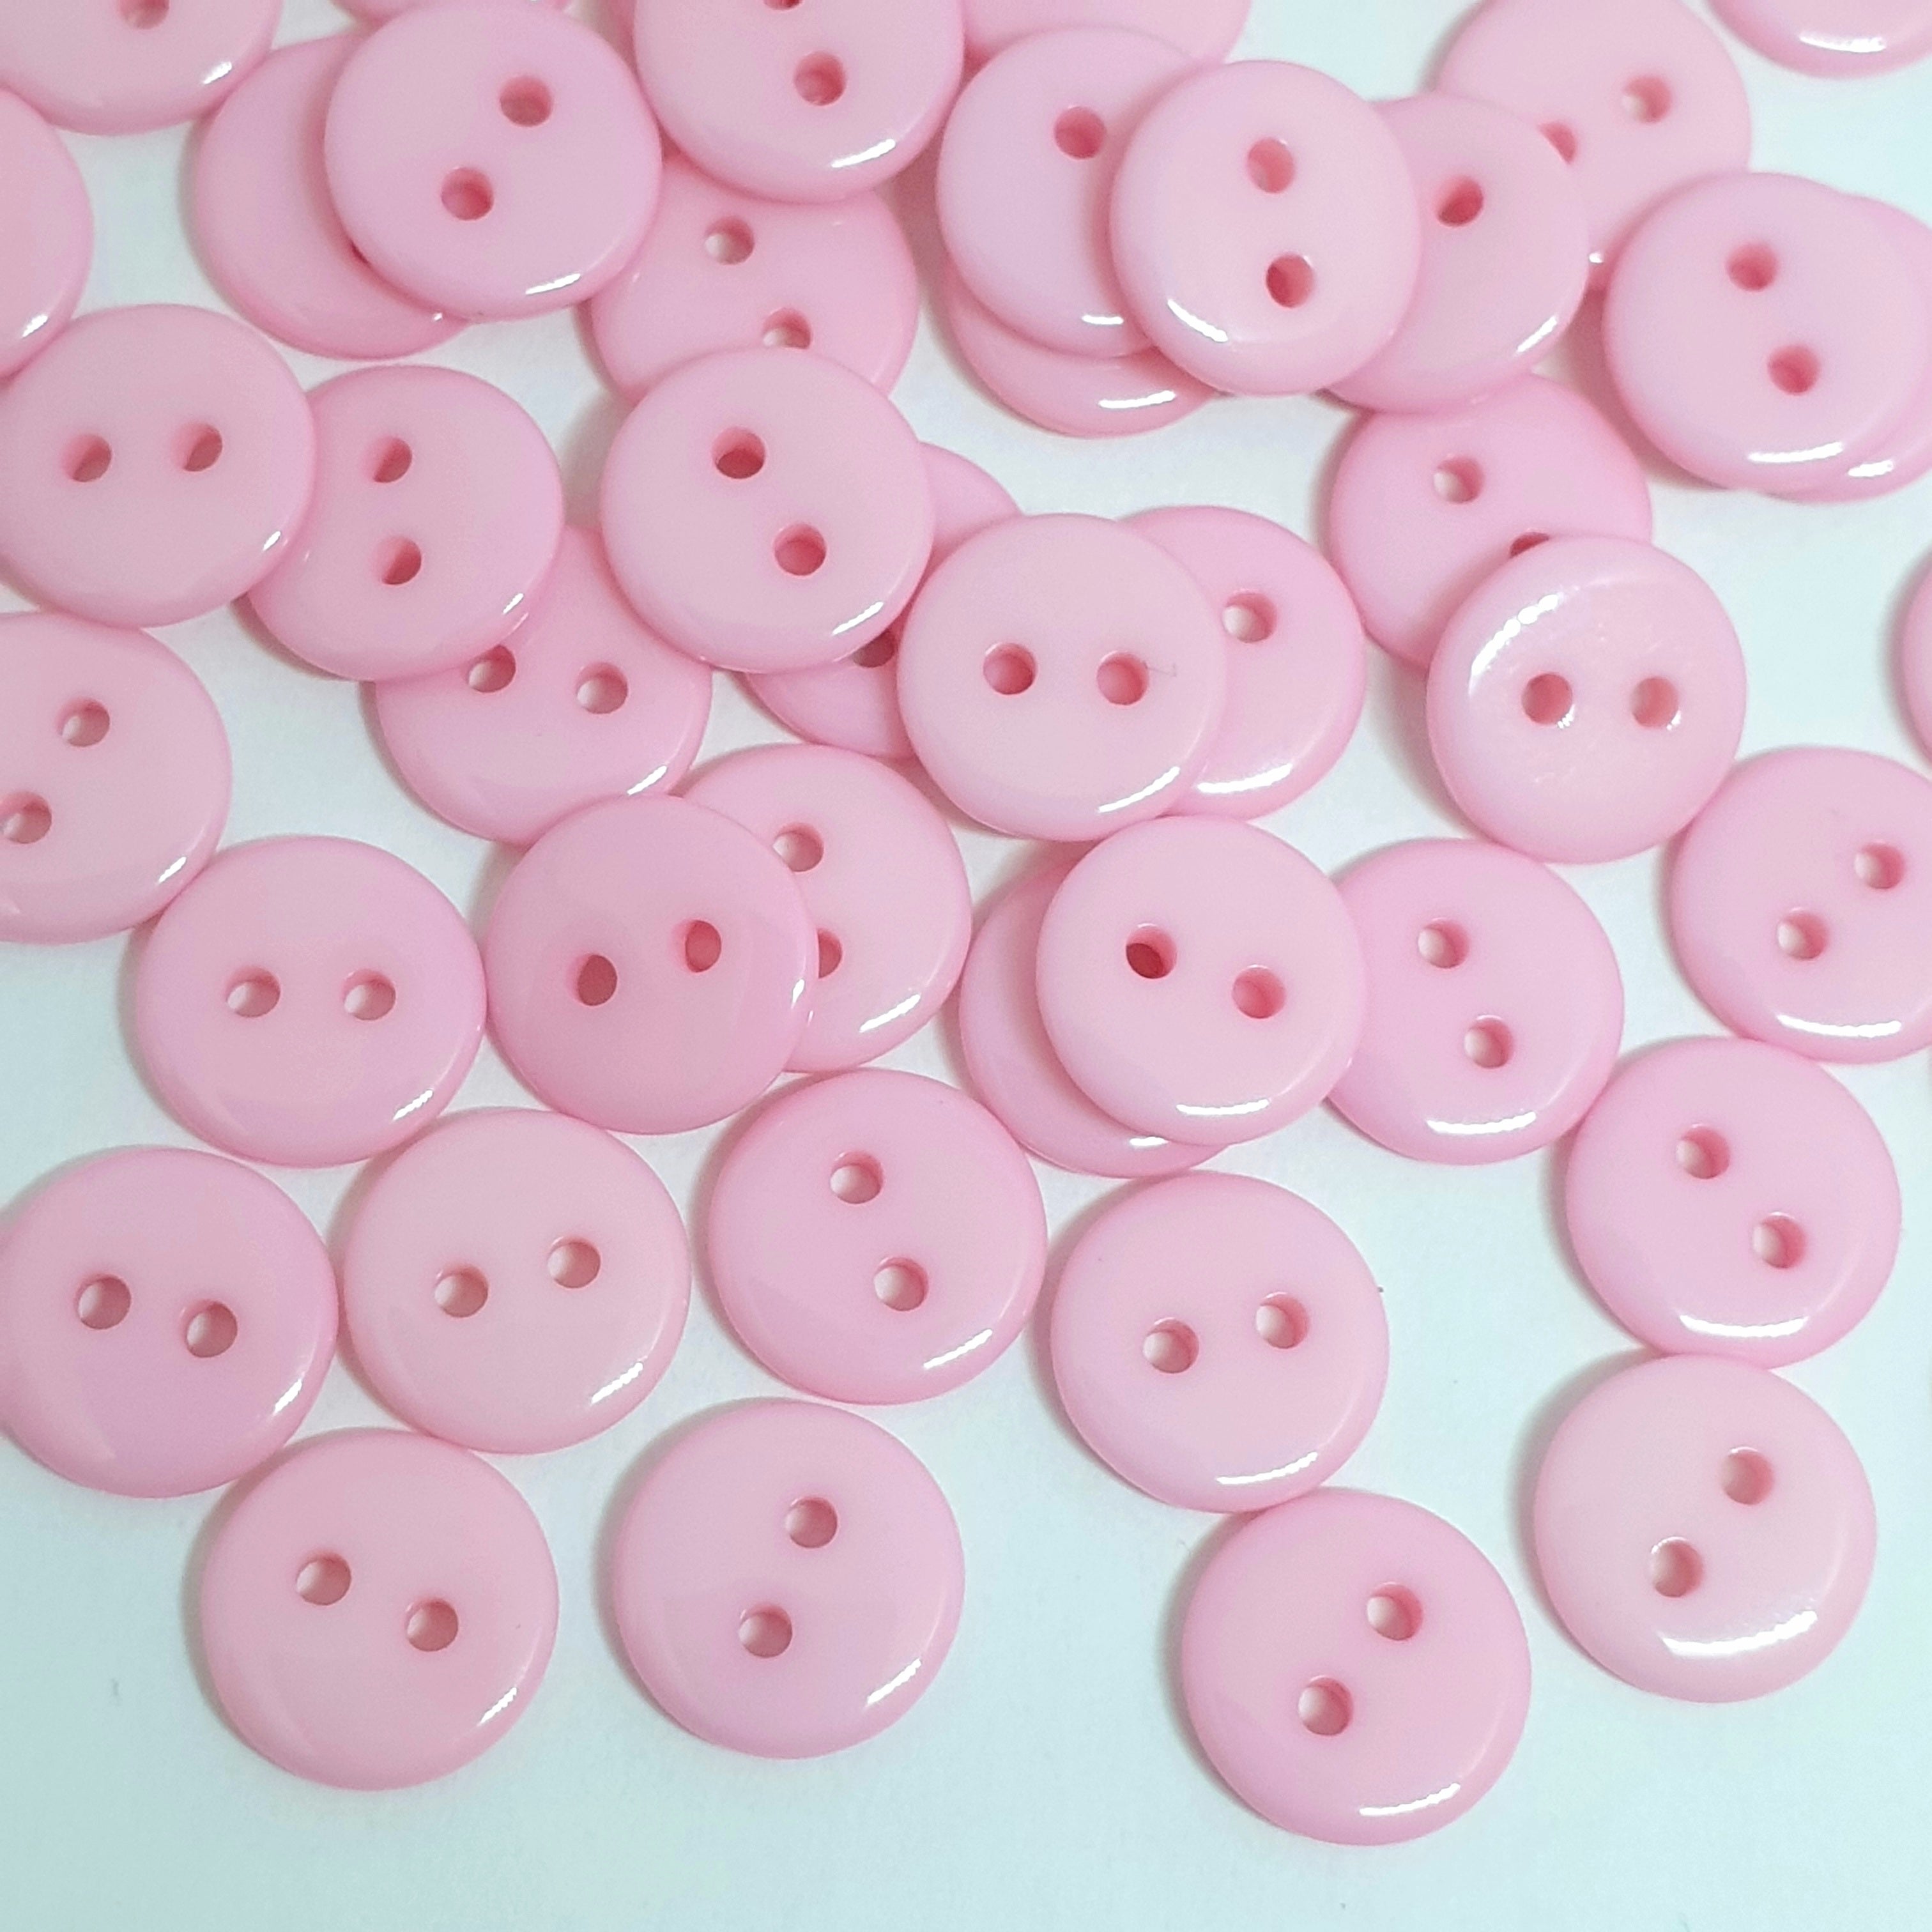 MajorCrafts 120pcs 10mm Light Pink 2 Holes Small Round Resin Sewing Buttons B03